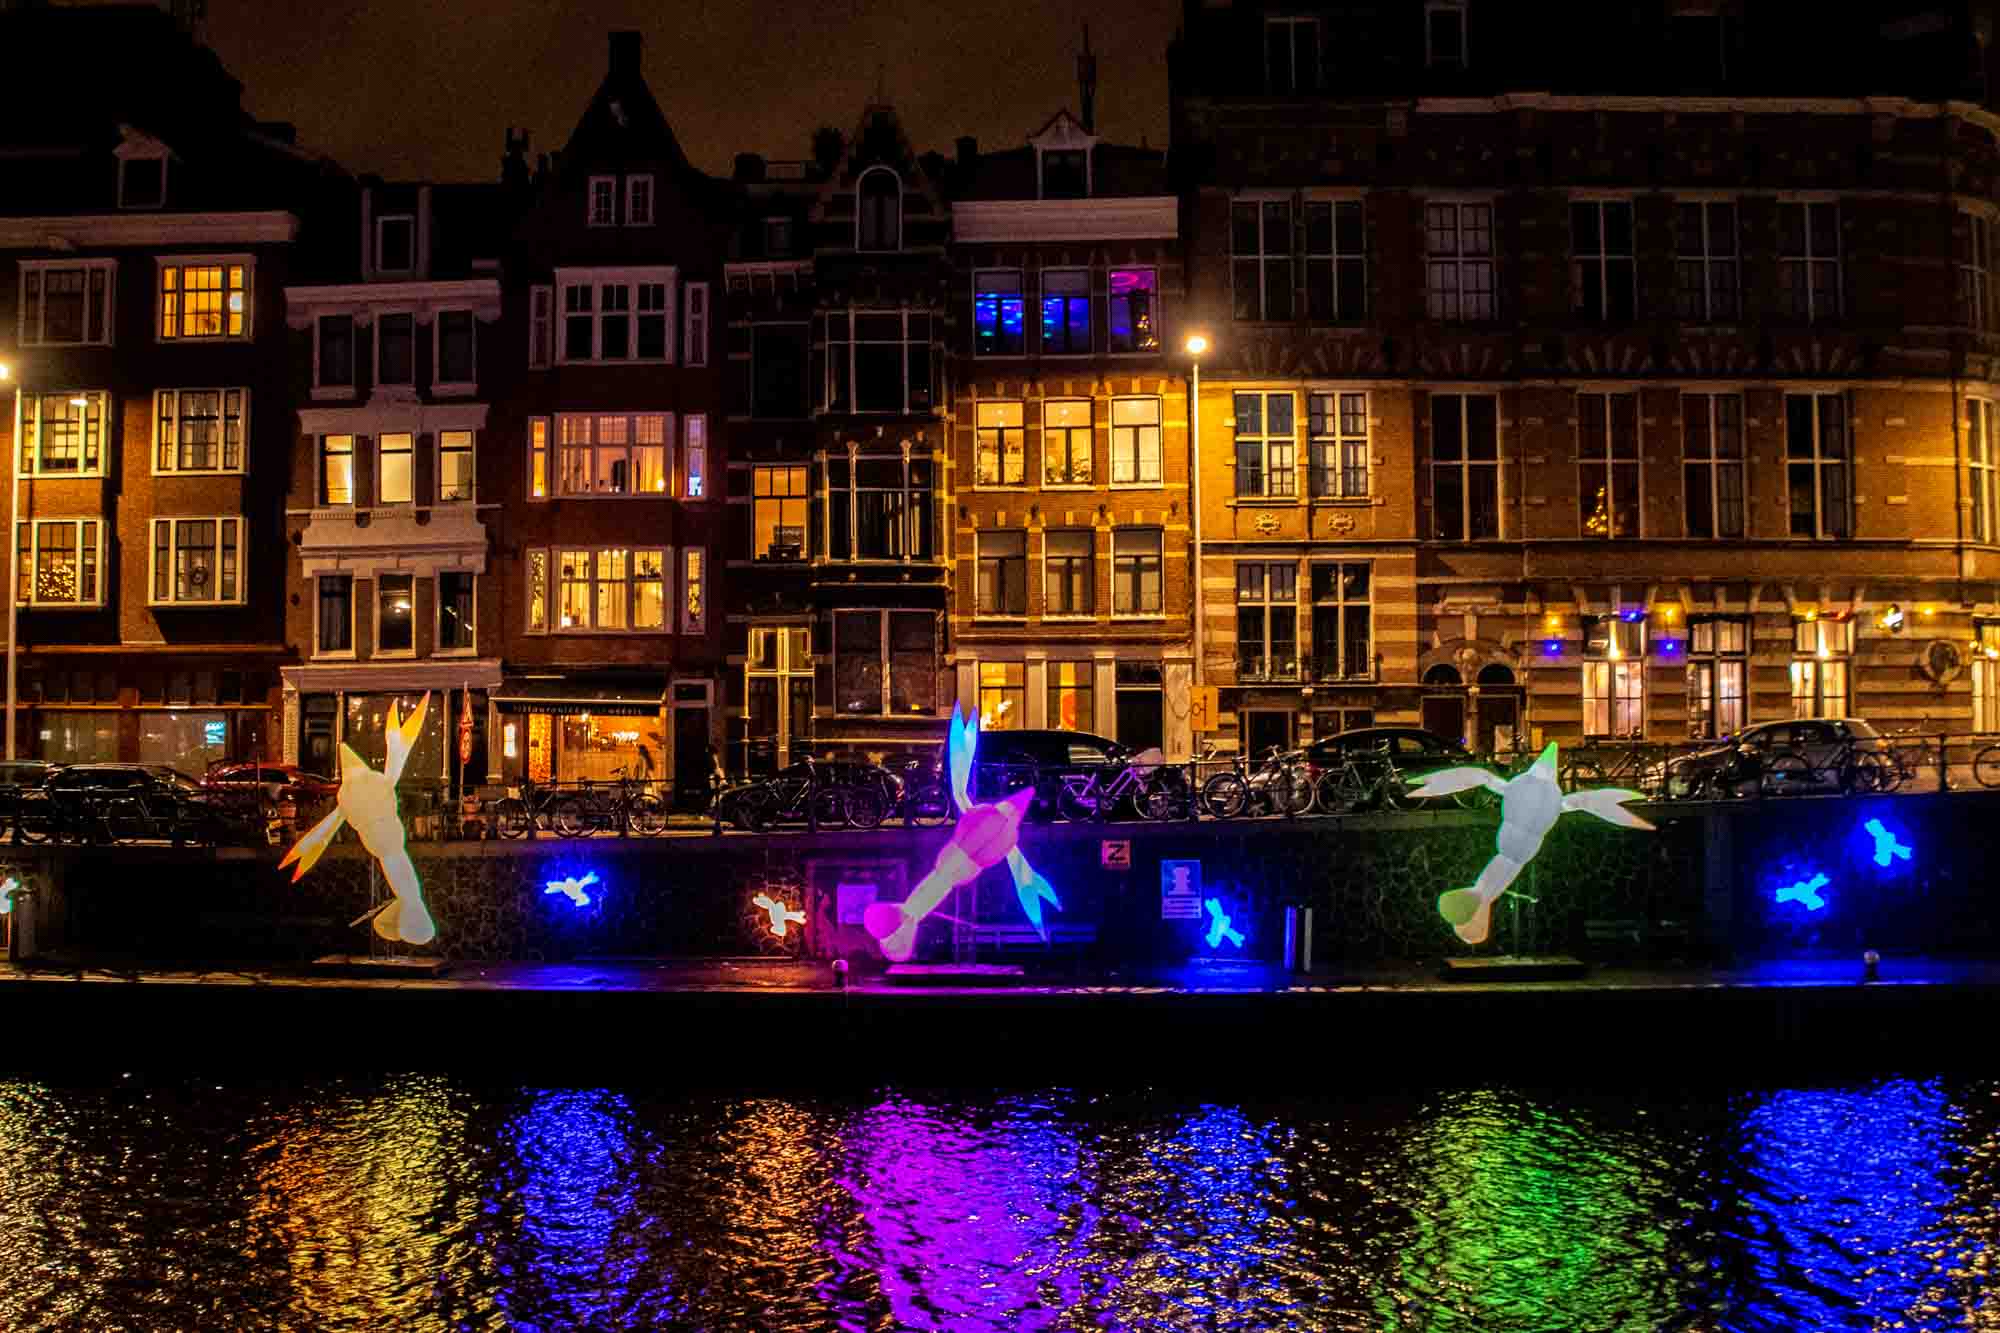 Illuminated artworks along the side of a canal at night